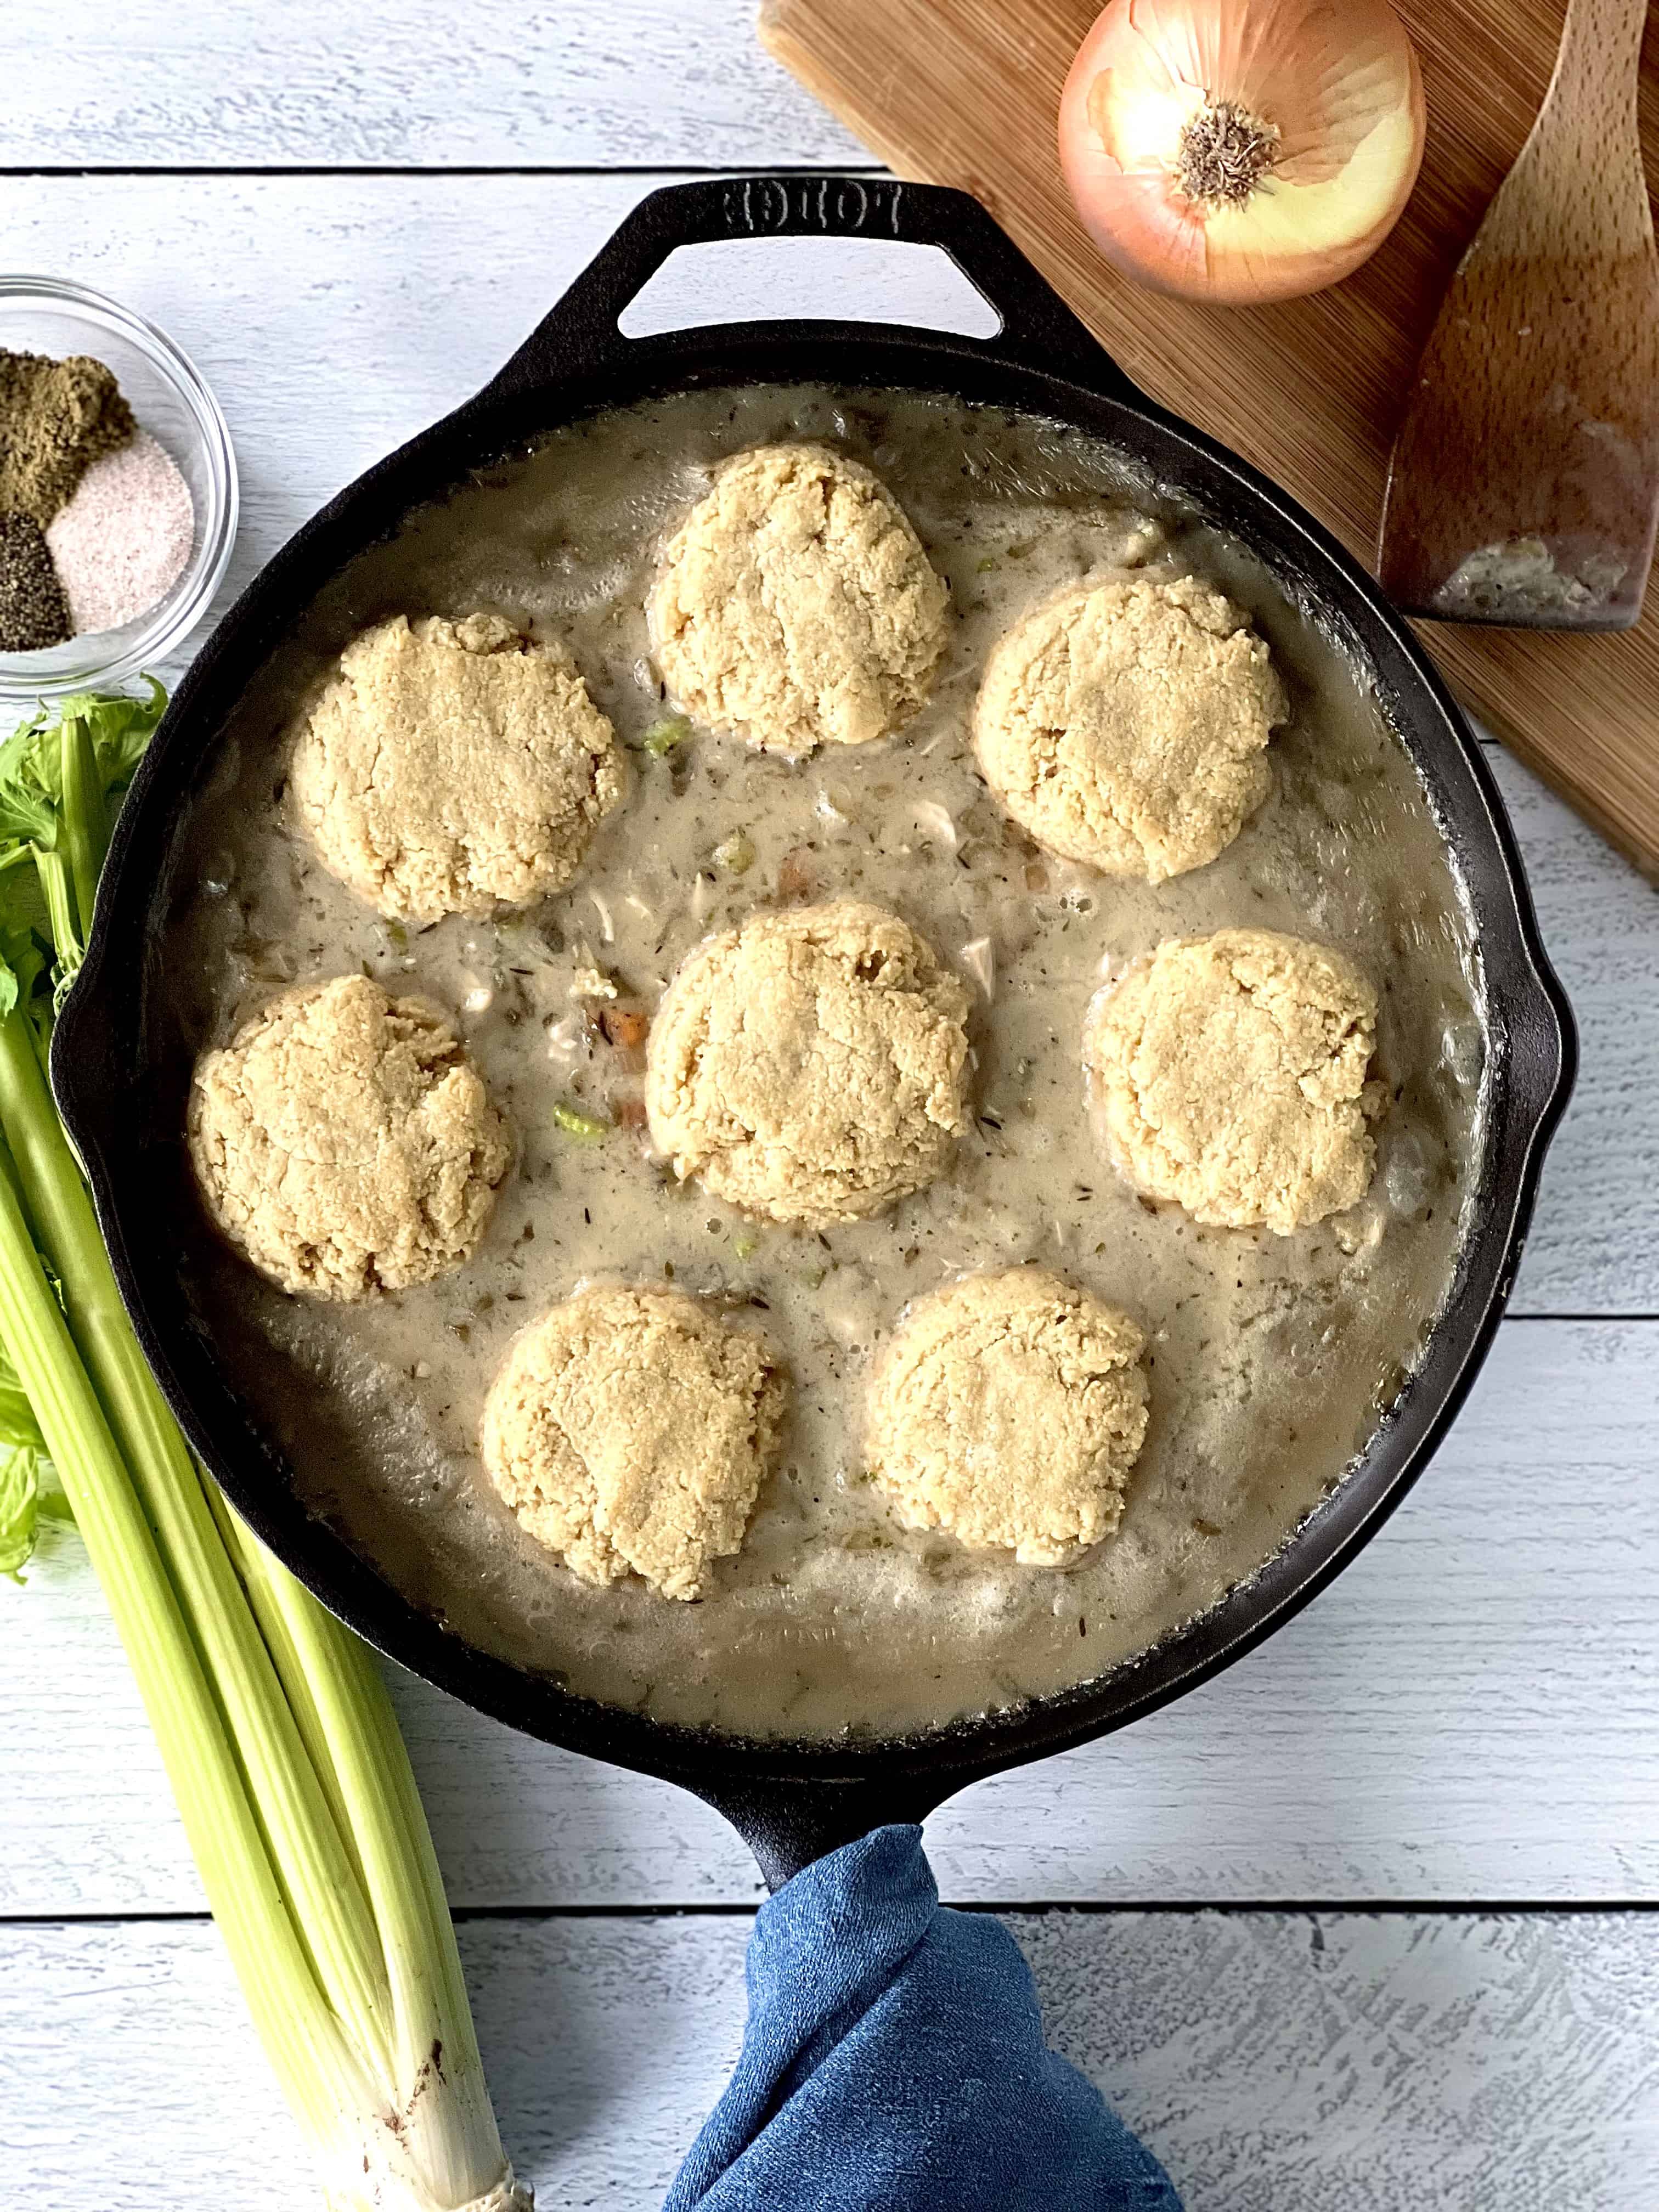 gluten-free biscuits on top of a chicken pot pie filling in a cast iron skillet on a white wooden table next to celery, a bowl of spices and a wooden cutting board with an onion and wooden spoon